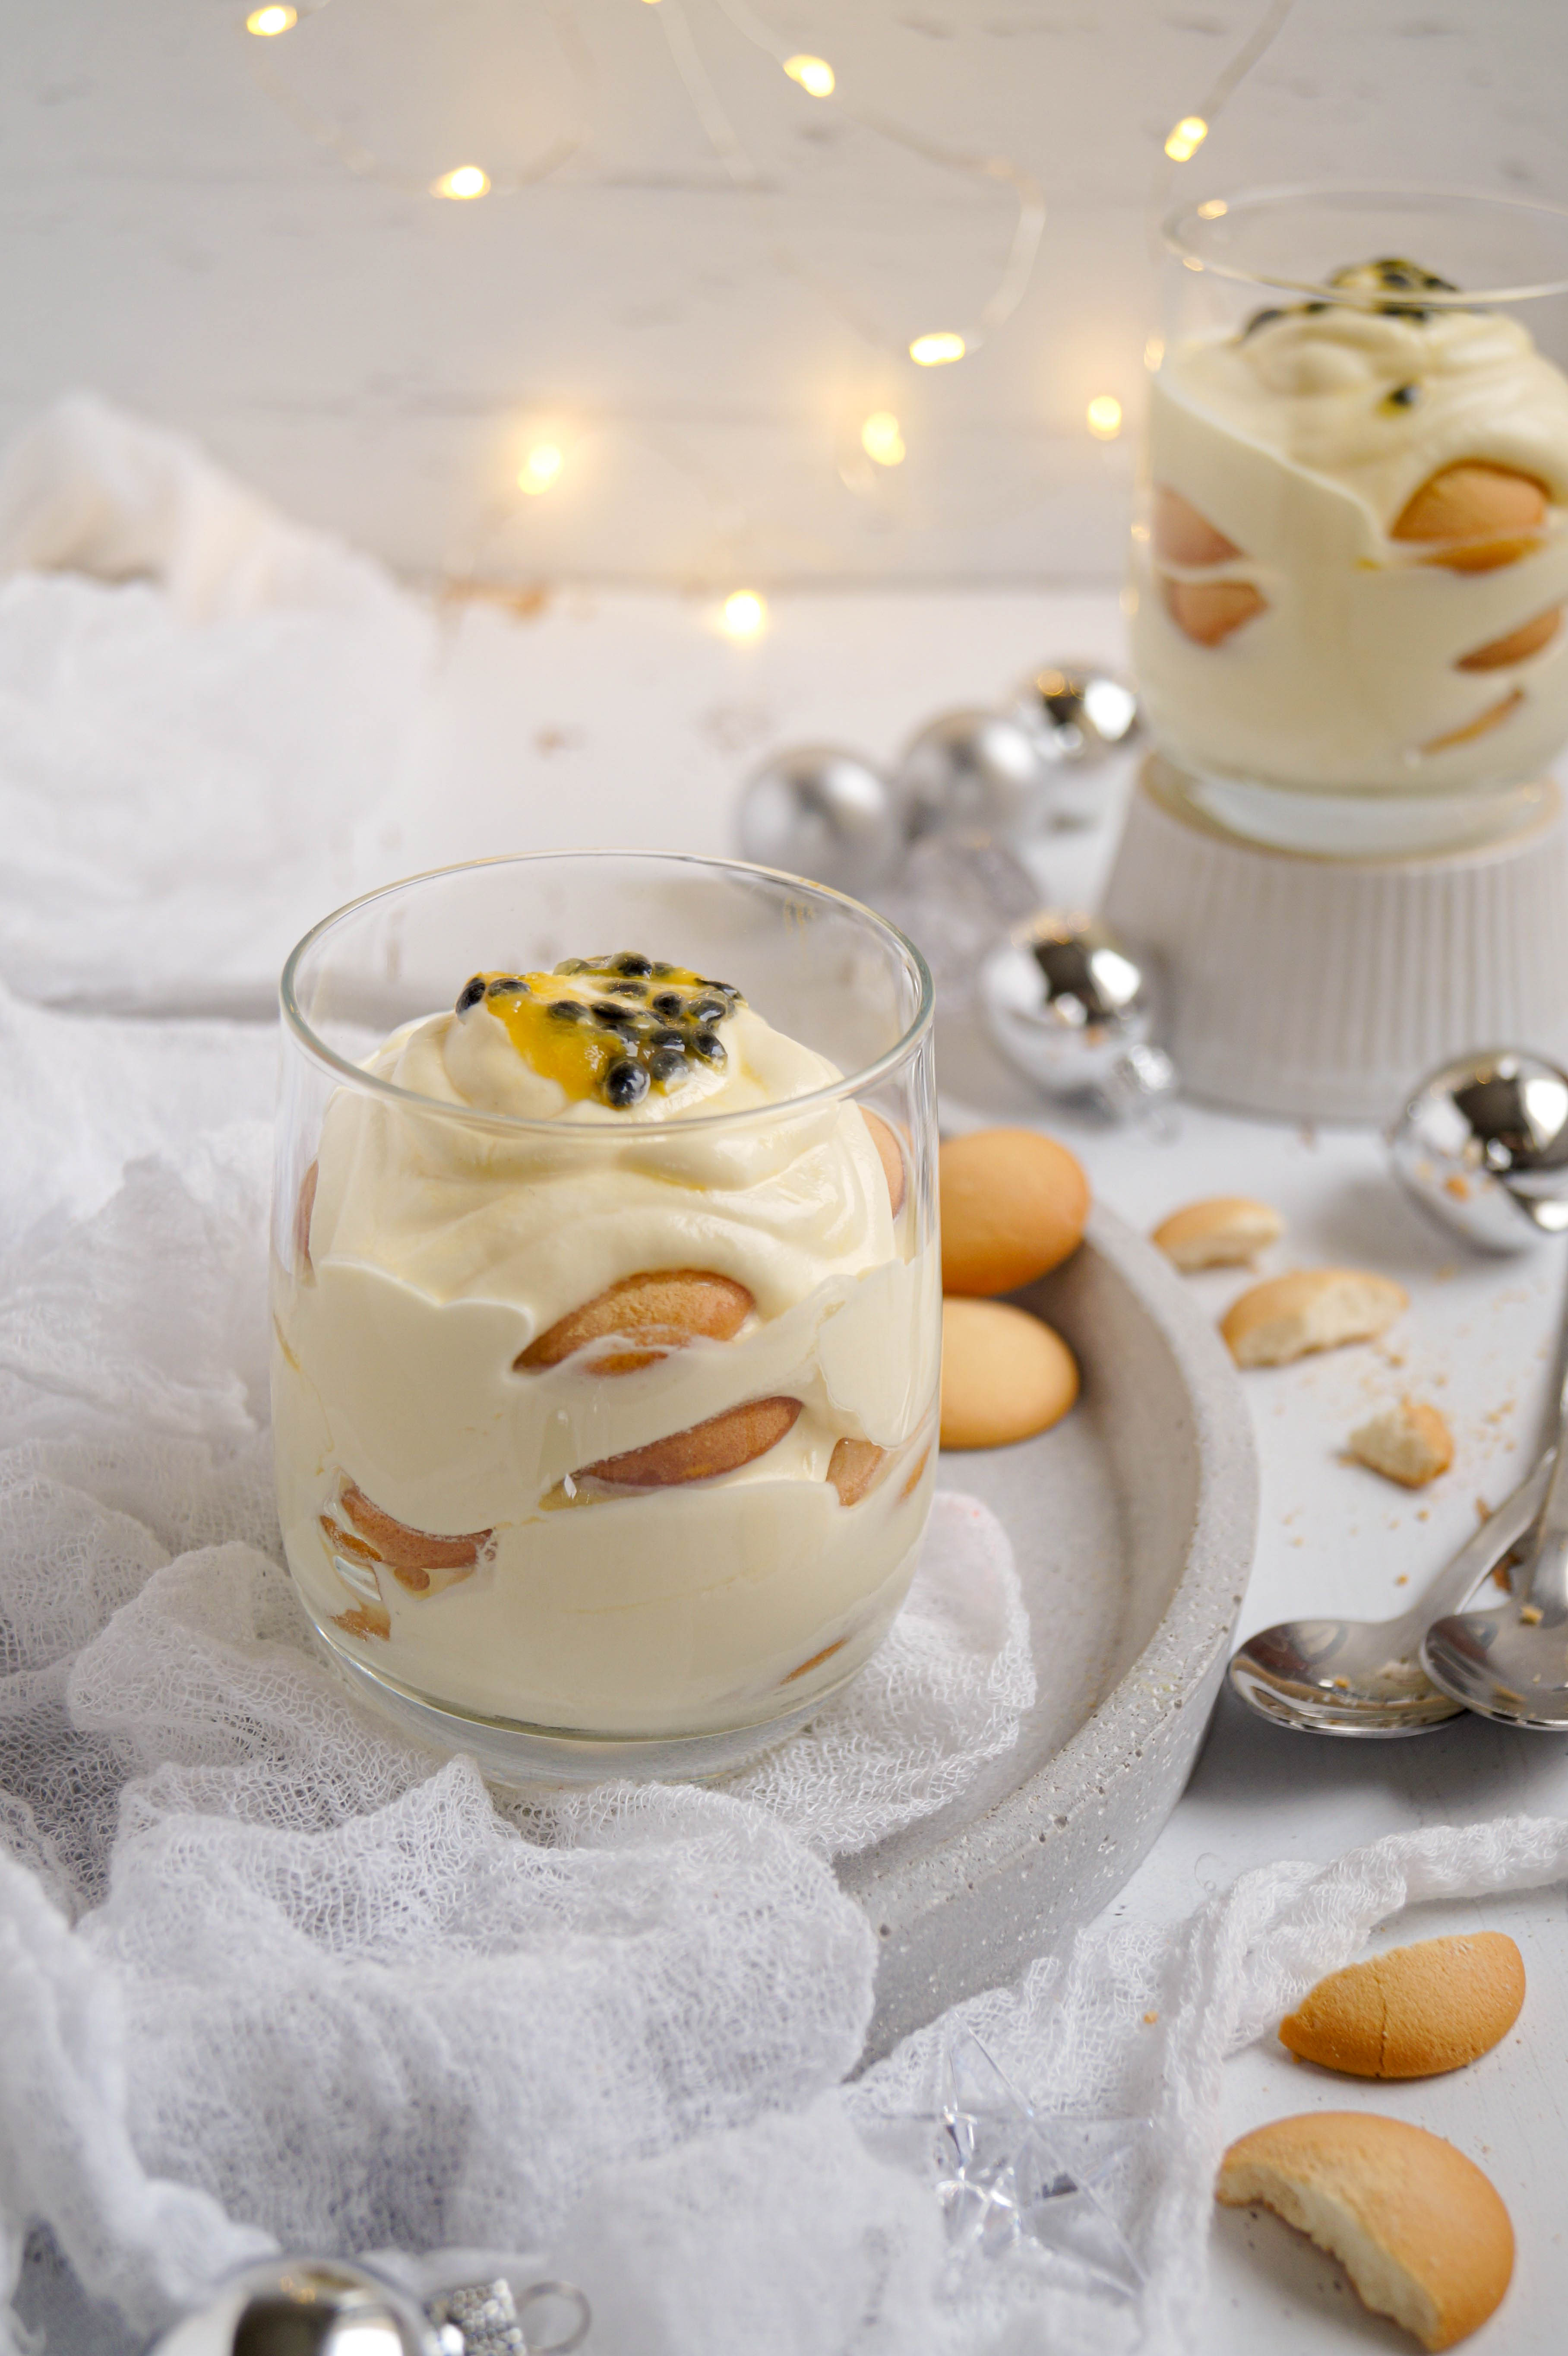 passion_fruit_mousse_3_of_3.jpg